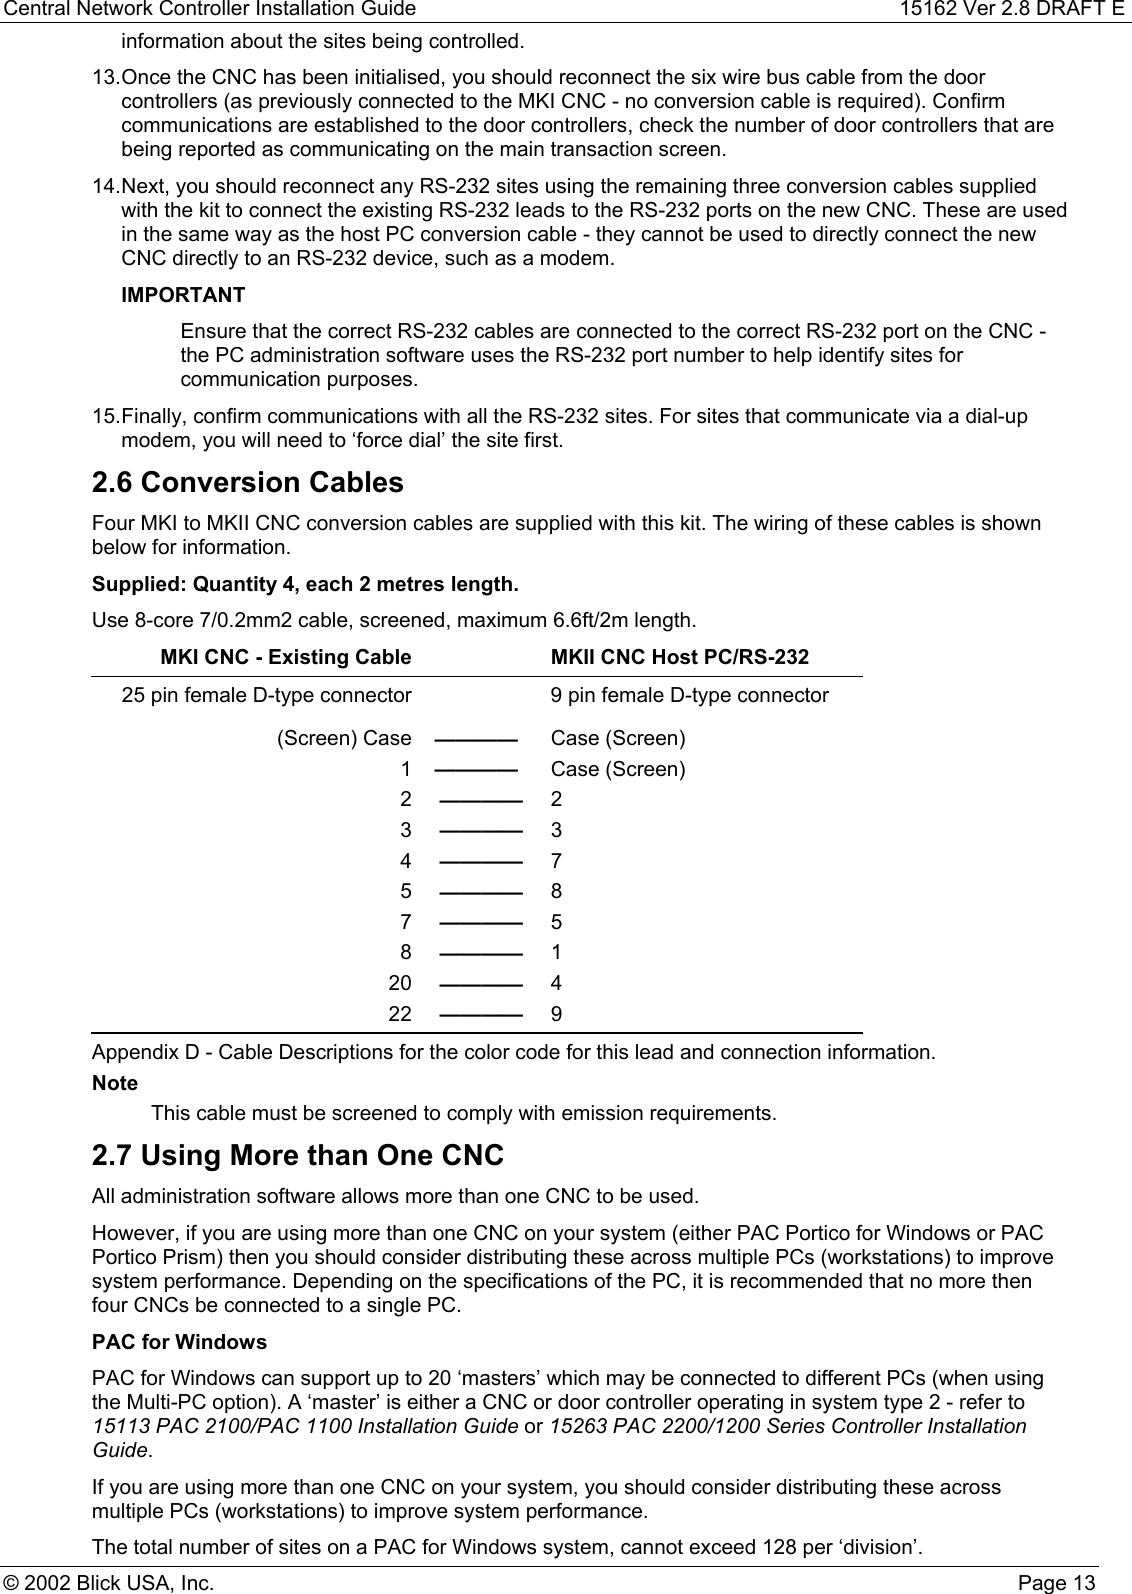 Central Network Controller Installation Guide 15162 Ver 2.8 DRAFT E© 2002 Blick USA, Inc. Page 13information about the sites being controlled.13. Once the CNC has been initialised, you should reconnect the six wire bus cable from the doorcontrollers (as previously connected to the MKI CNC - no conversion cable is required). Confirmcommunications are established to the door controllers, check the number of door controllers that arebeing reported as communicating on the main transaction screen.14. Next, you should reconnect any RS-232 sites using the remaining three conversion cables suppliedwith the kit to connect the existing RS-232 leads to the RS-232 ports on the new CNC. These are usedin the same way as the host PC conversion cable - they cannot be used to directly connect the newCNC directly to an RS-232 device, such as a modem.IMPORTANTEnsure that the correct RS-232 cables are connected to the correct RS-232 port on the CNC -the PC administration software uses the RS-232 port number to help identify sites forcommunication purposes.15. Finally, confirm communications with all the RS-232 sites. For sites that communicate via a dial-upmodem, you will need to ‘force dial’ the site first.2.6 Conversion CablesFour MKI to MKII CNC conversion cables are supplied with this kit. The wiring of these cables is shownbelow for information.Supplied: Quantity 4, each 2 metres length.Use 8-core 7/0.2mm2 cable, screened, maximum 6.6ft/2m length.MKI CNC - Existing Cable MKII CNC Host PC/RS-23225 pin female D-type connector 9 pin female D-type connector(Screen) Case ———— Case (Screen)1———— Case (Screen)2———— 23———— 34———— 75———— 87———— 58———— 120 ———— 422 ———— 9Appendix D - Cable Descriptions for the color code for this lead and connection information.NoteThis cable must be screened to comply with emission requirements.2.7 Using More than One CNCAll administration software allows more than one CNC to be used.However, if you are using more than one CNC on your system (either PAC Portico for Windows or PACPortico Prism) then you should consider distributing these across multiple PCs (workstations) to improvesystem performance. Depending on the specifications of the PC, it is recommended that no more thenfour CNCs be connected to a single PC.PAC for WindowsPAC for Windows can support up to 20 ‘masters’ which may be connected to different PCs (when usingthe Multi-PC option). A ‘master’ is either a CNC or door controller operating in system type 2 - refer to15113 PAC 2100/PAC 1100 Installation Guide or 15263 PAC 2200/1200 Series Controller InstallationGuide.If you are using more than one CNC on your system, you should consider distributing these acrossmultiple PCs (workstations) to improve system performance.The total number of sites on a PAC for Windows system, cannot exceed 128 per ‘division’.